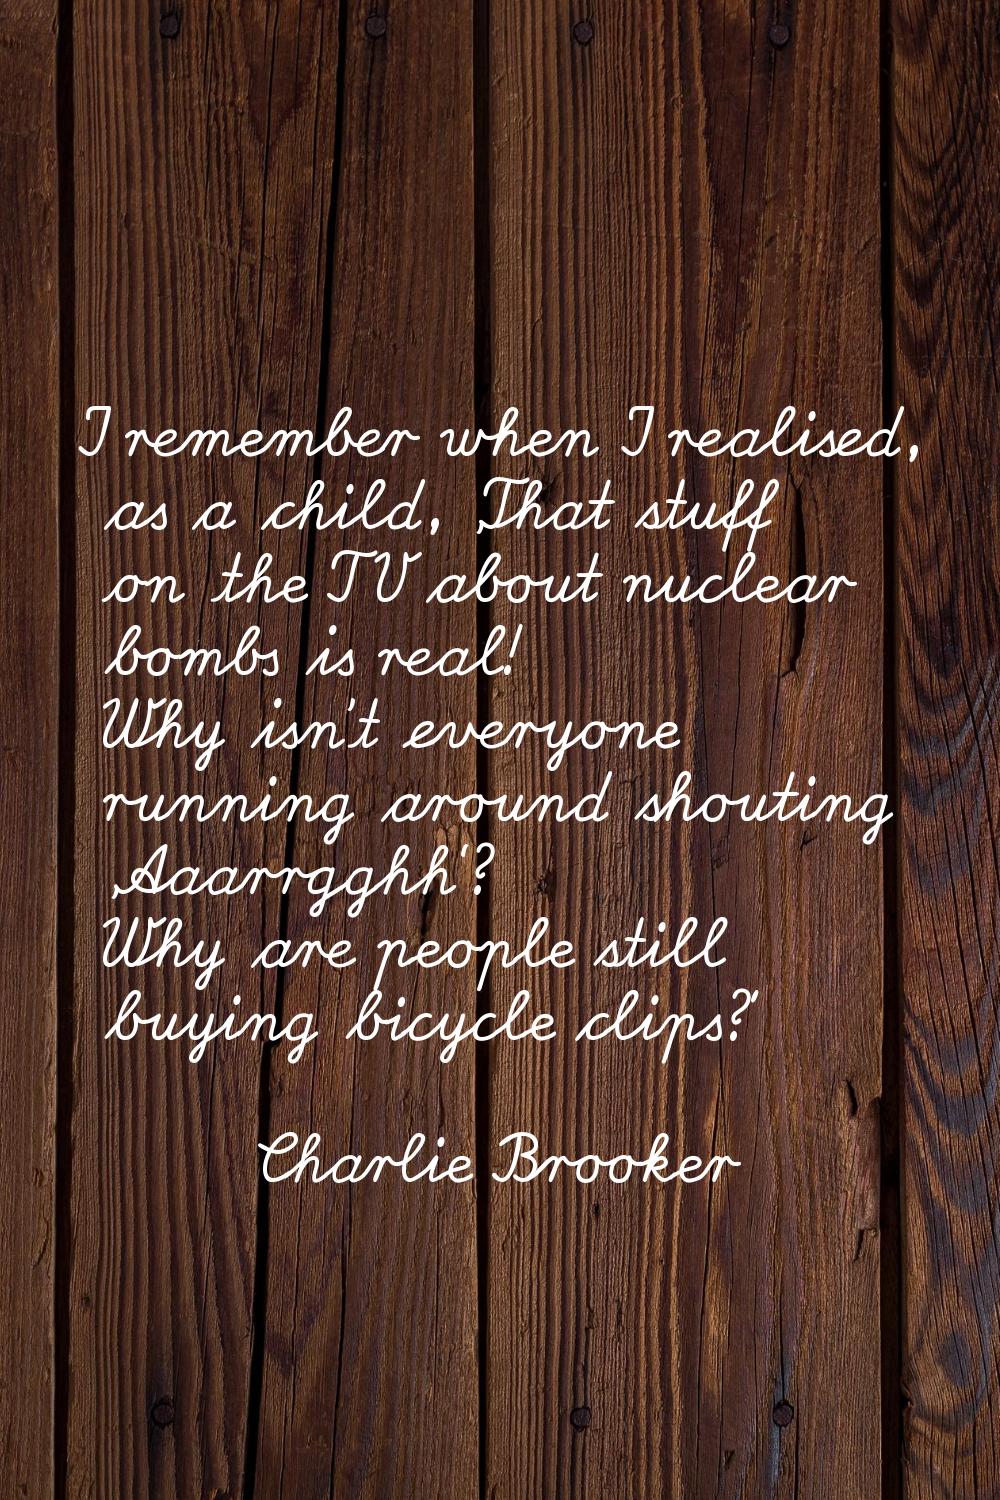 I remember when I realised, as a child, 'That stuff on the TV about nuclear bombs is real! Why isn'